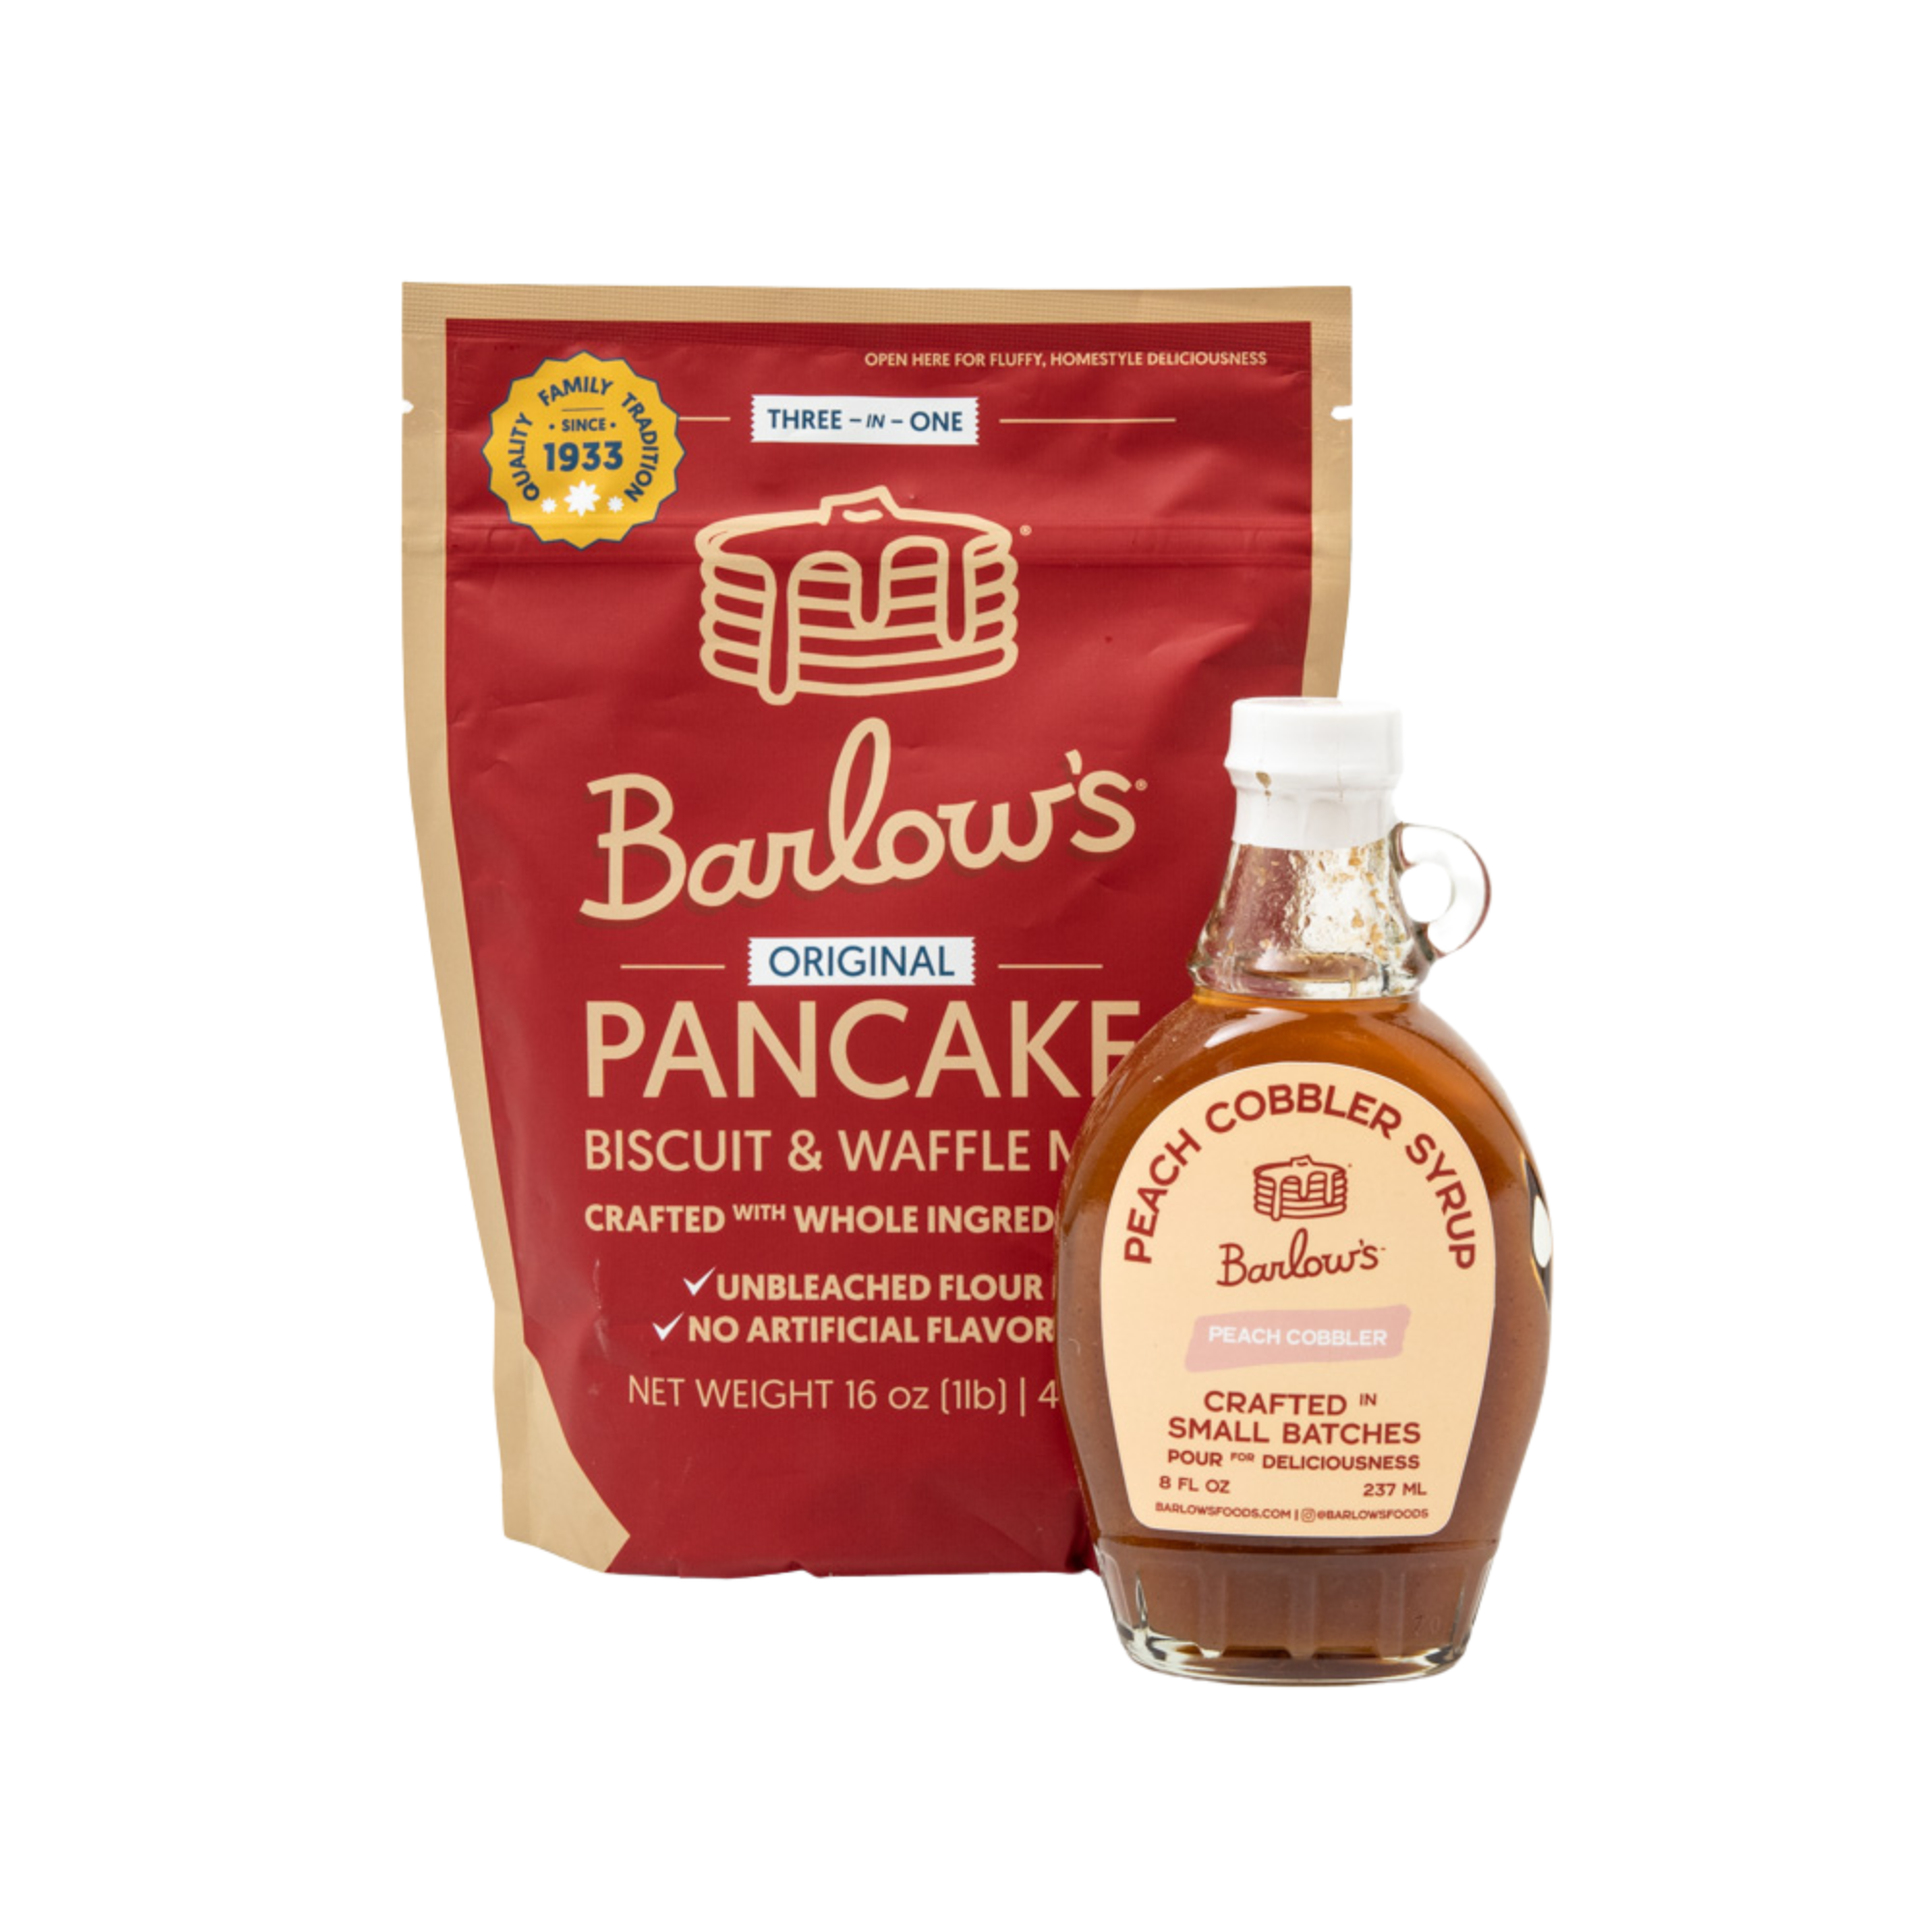 3-in-1 Pancake, Biscuit, and Waffle Mix